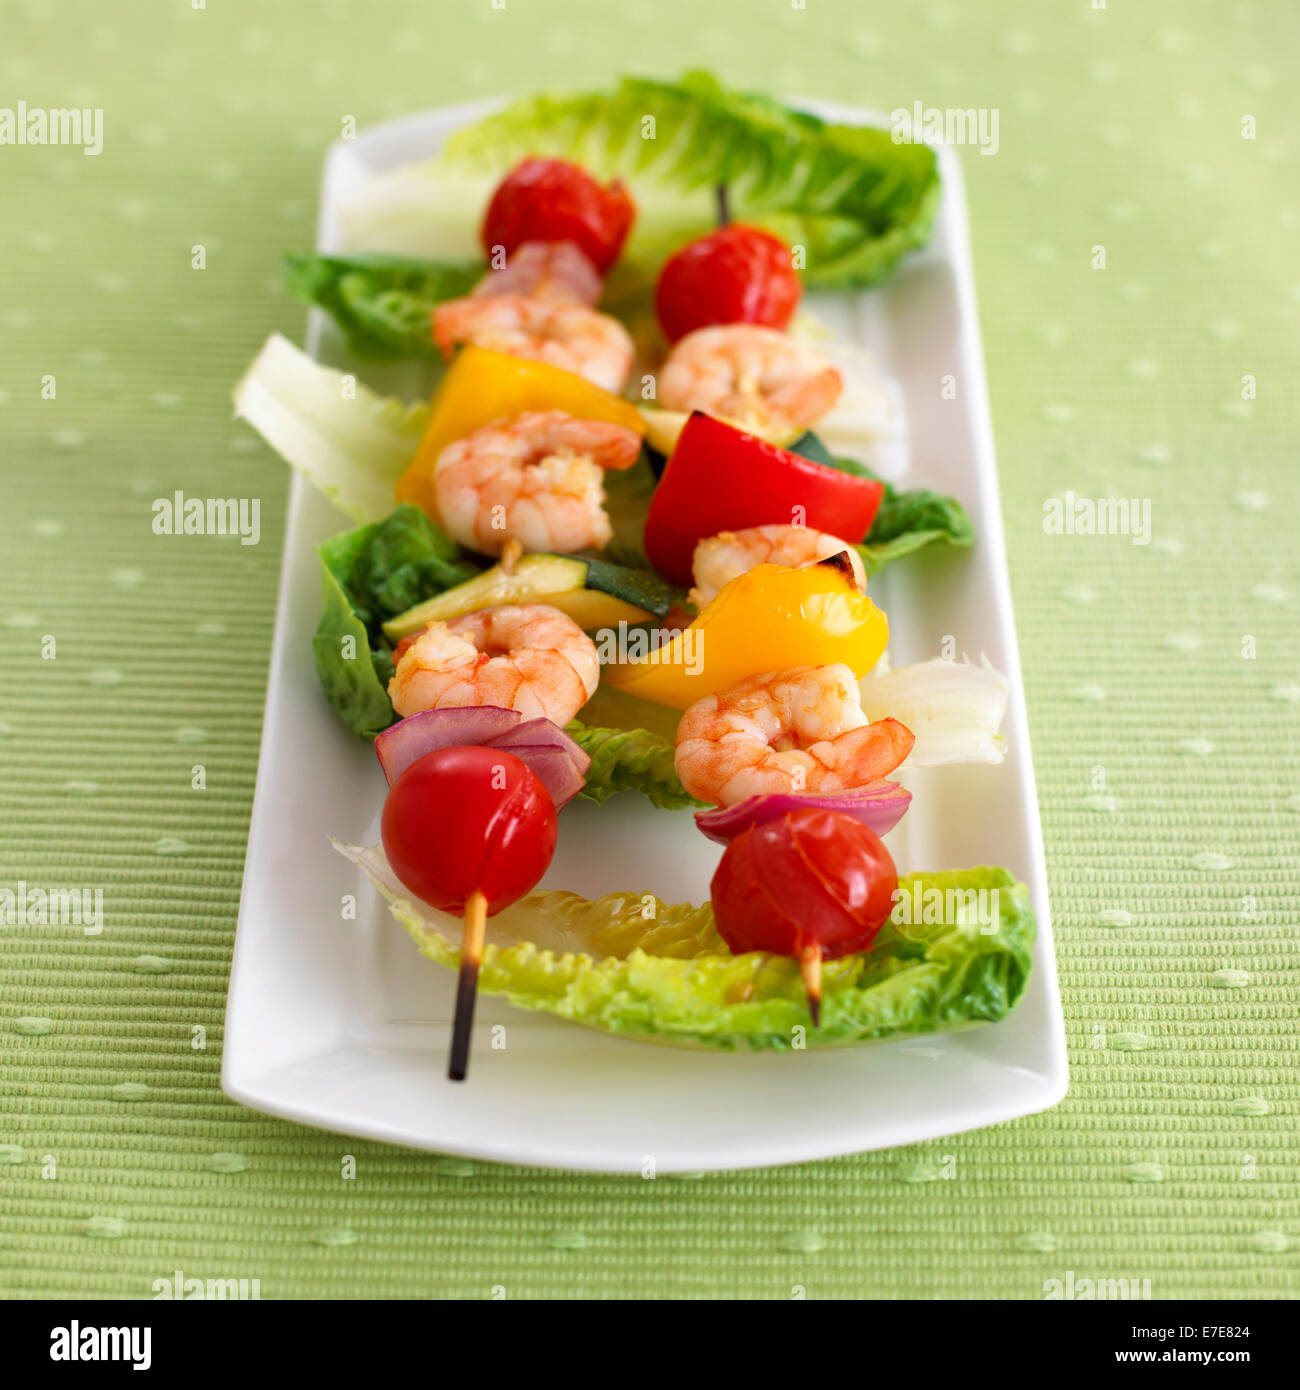 Cooked prawn, tomato and pepper skewers Stock Photo